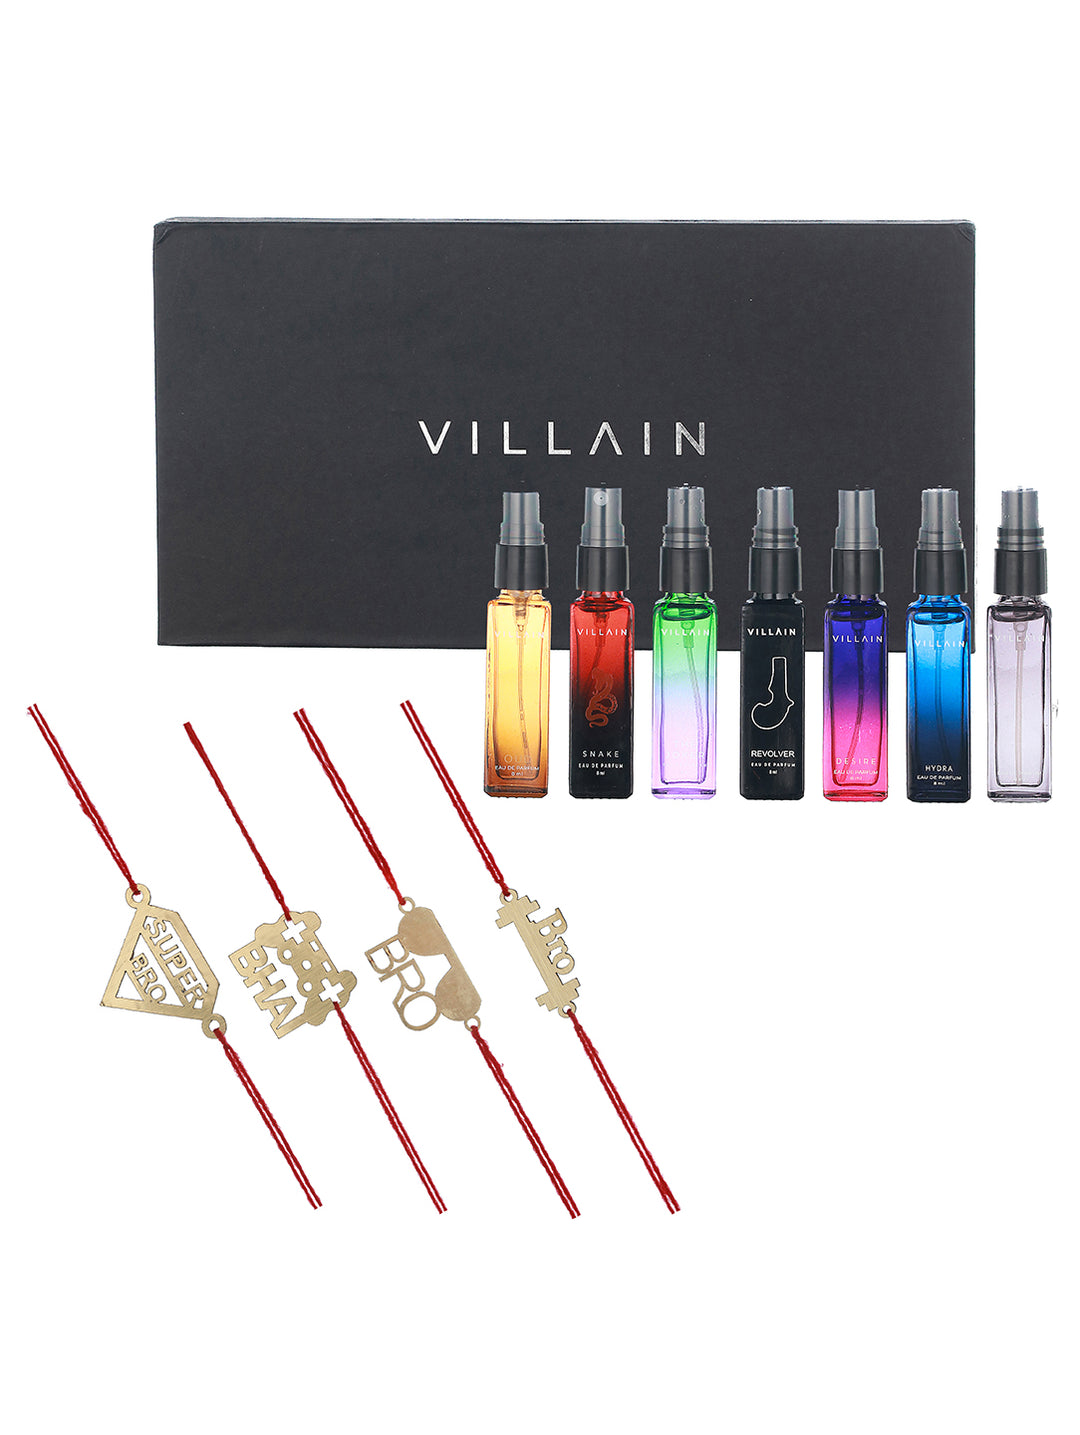 Wooden Thread Rakhi for Brother (Set of 4) with Villian Perfume Gift Box (Set of 7)